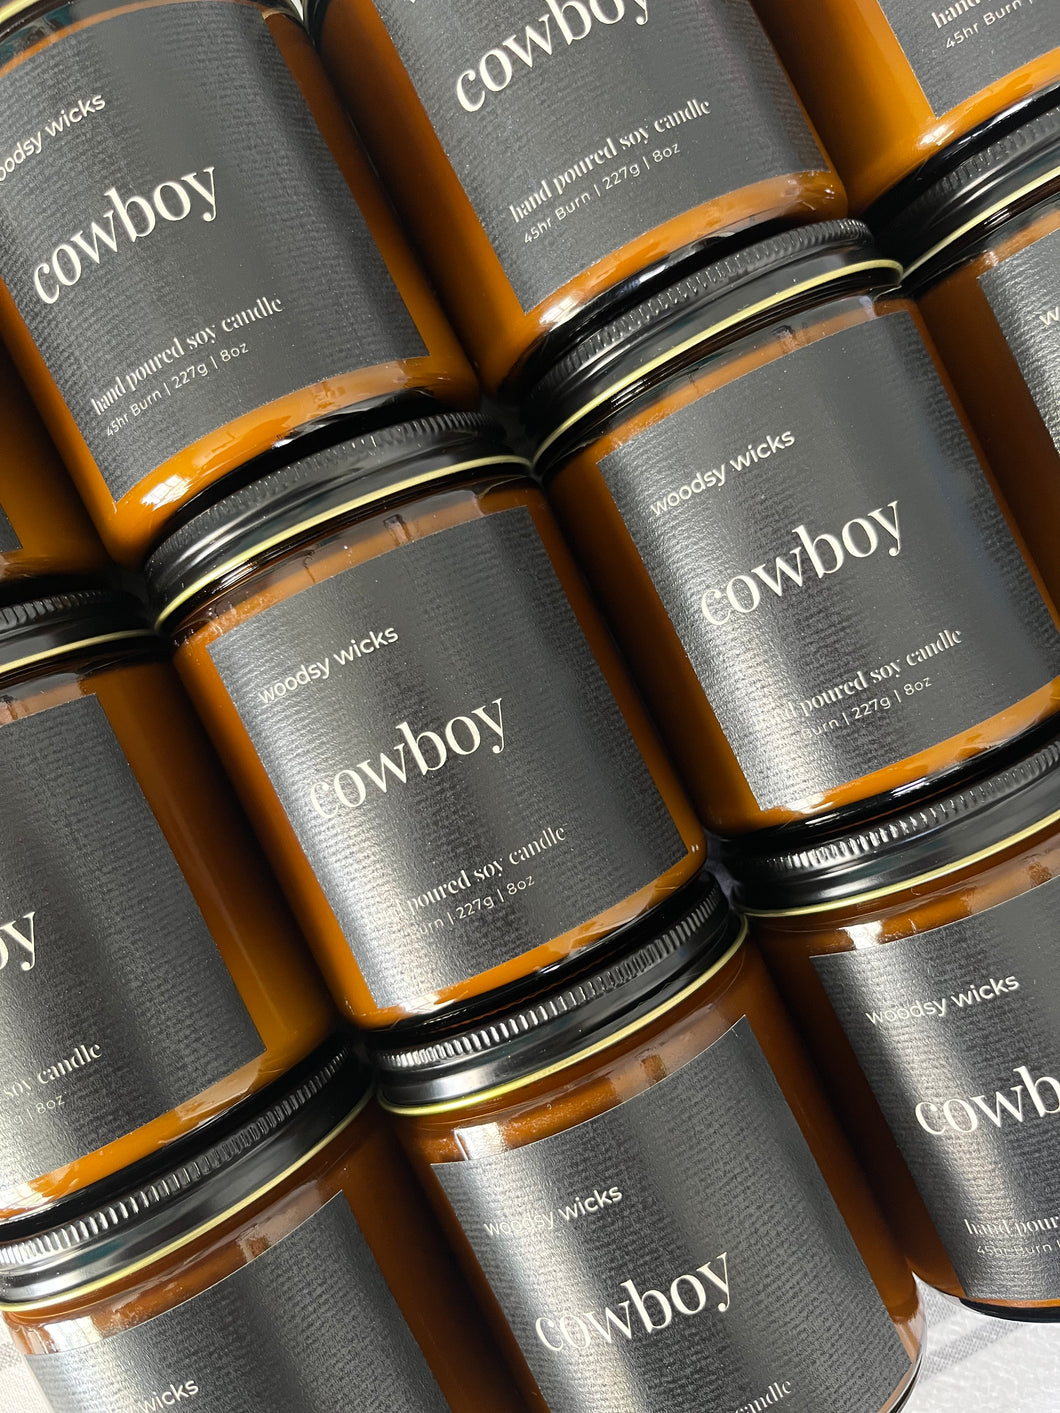 Cowboy - Amber jar - 100% Soy Wax Candle - Non-Toxic - Wanderlust Collection